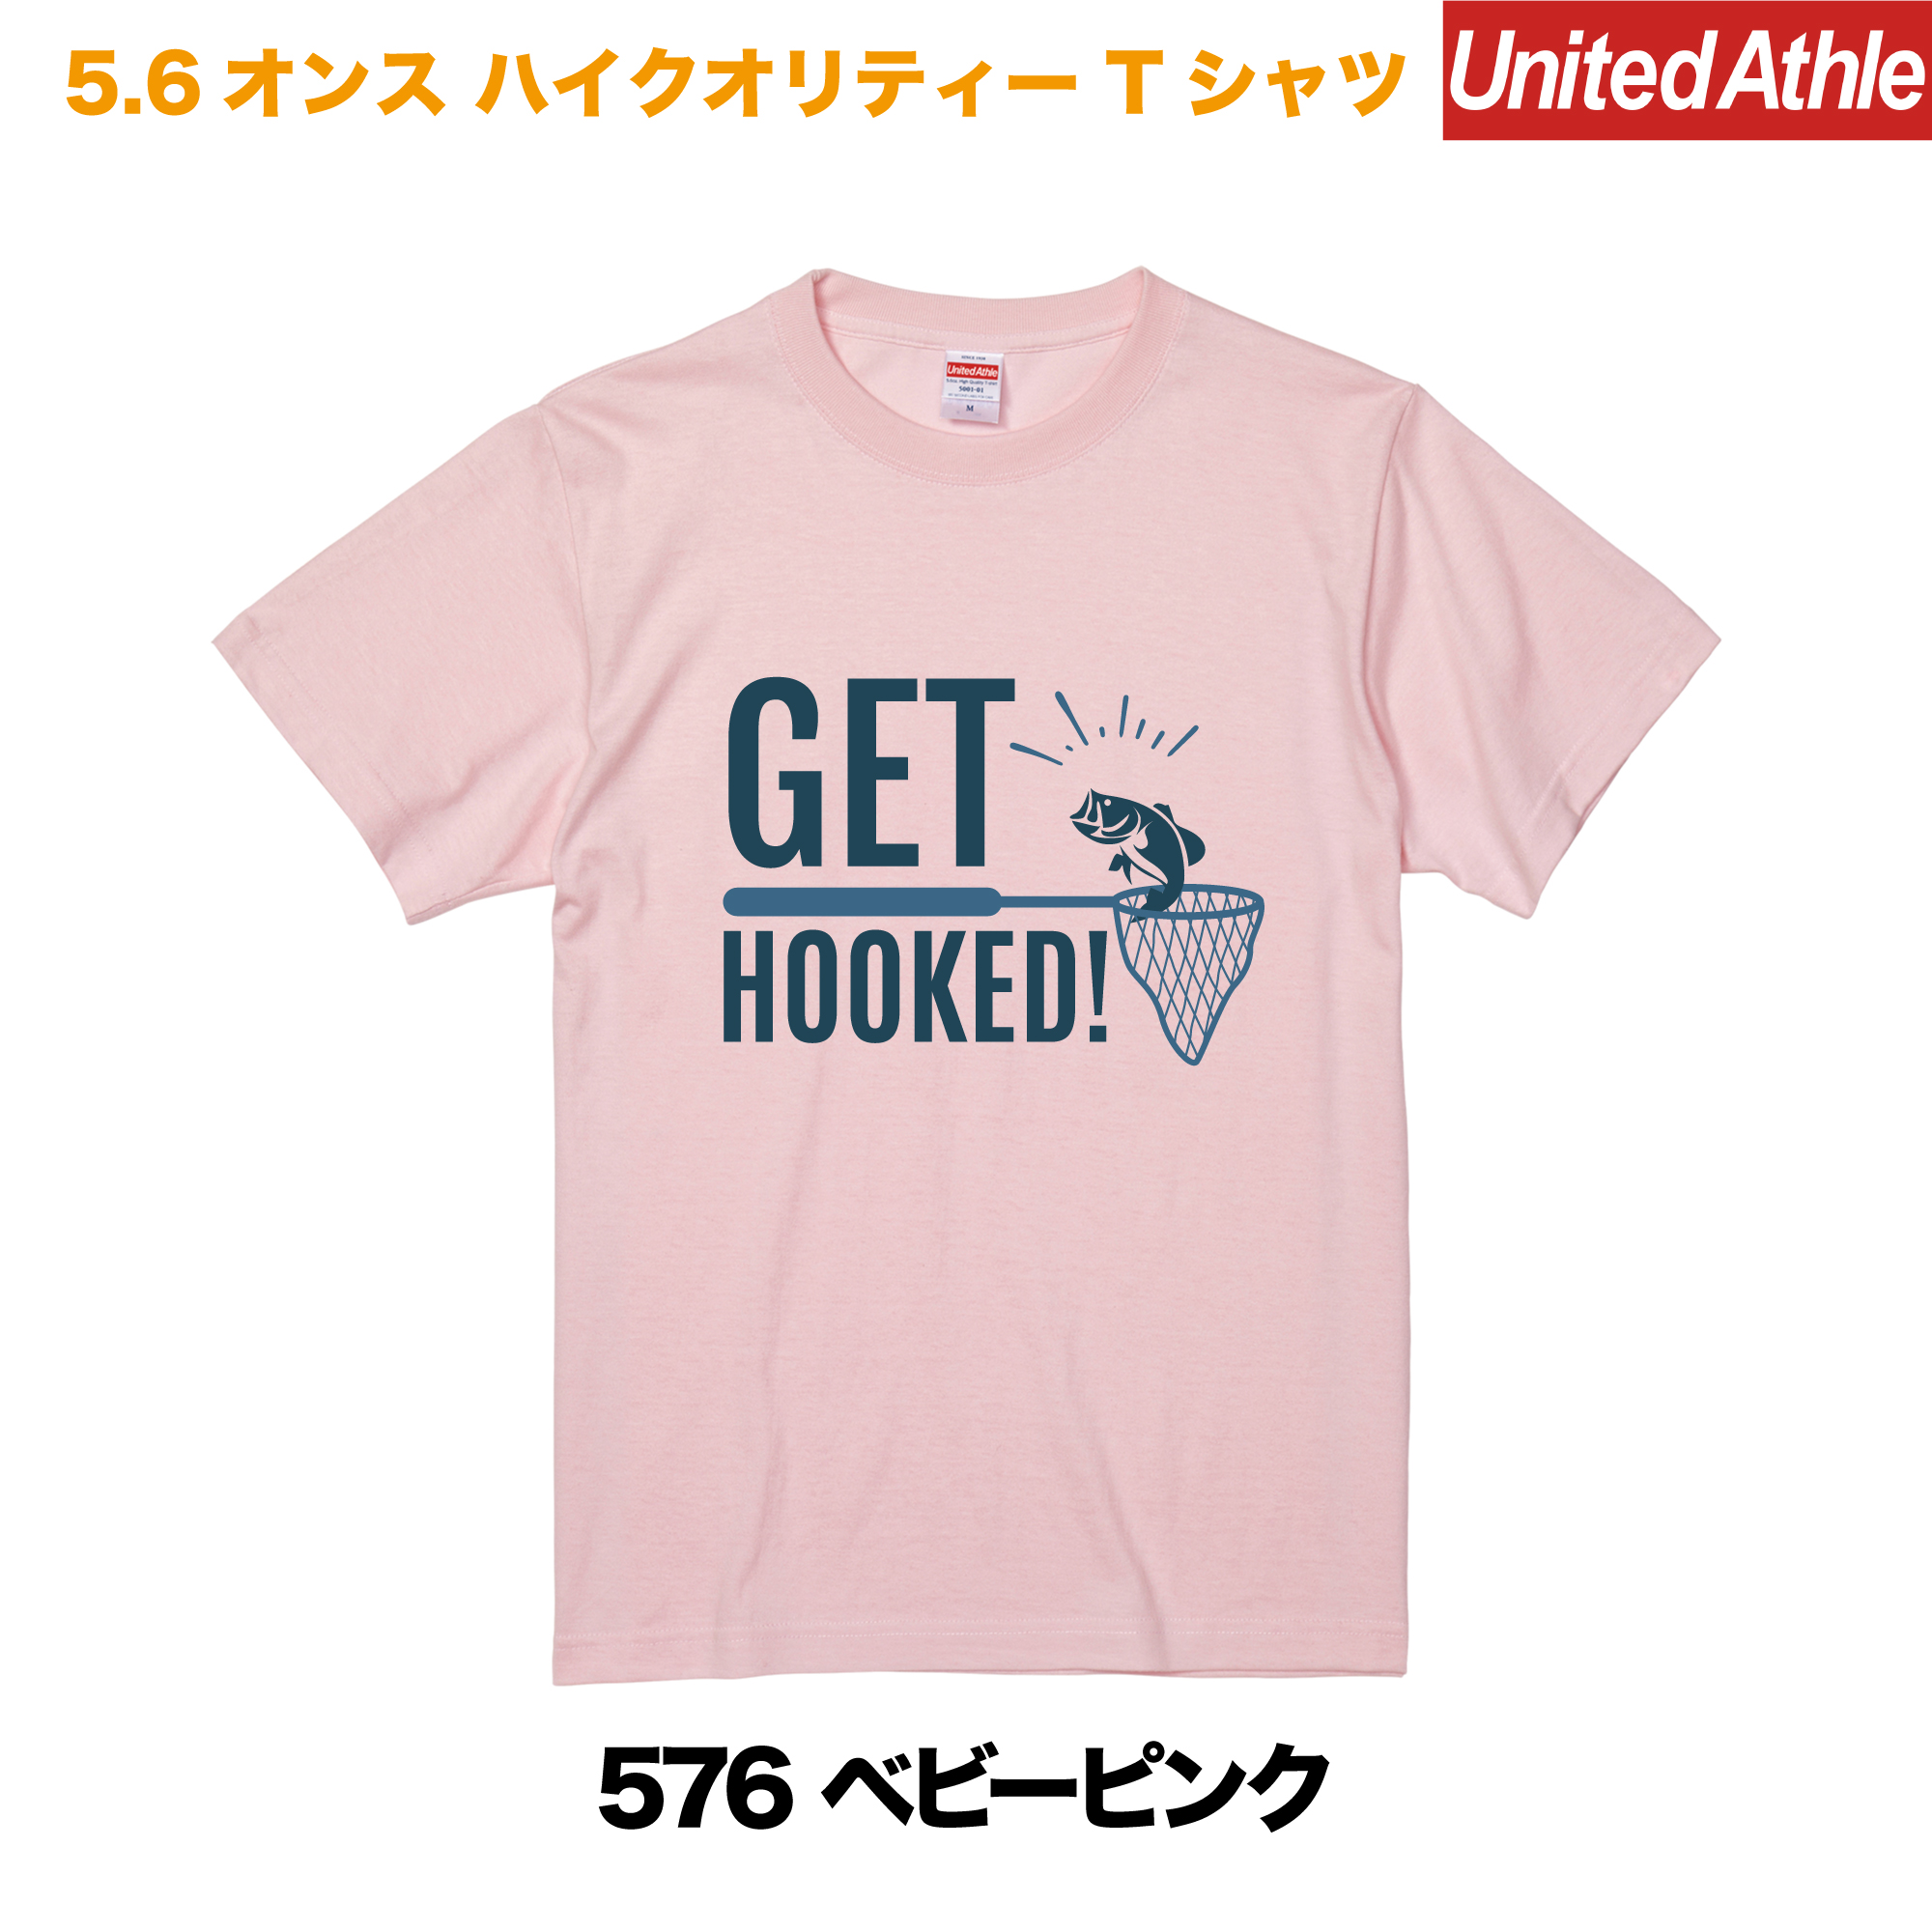 GET HOOKED　プリントTシャツ　5001-01【ベビーピンク】＜アダルト＞